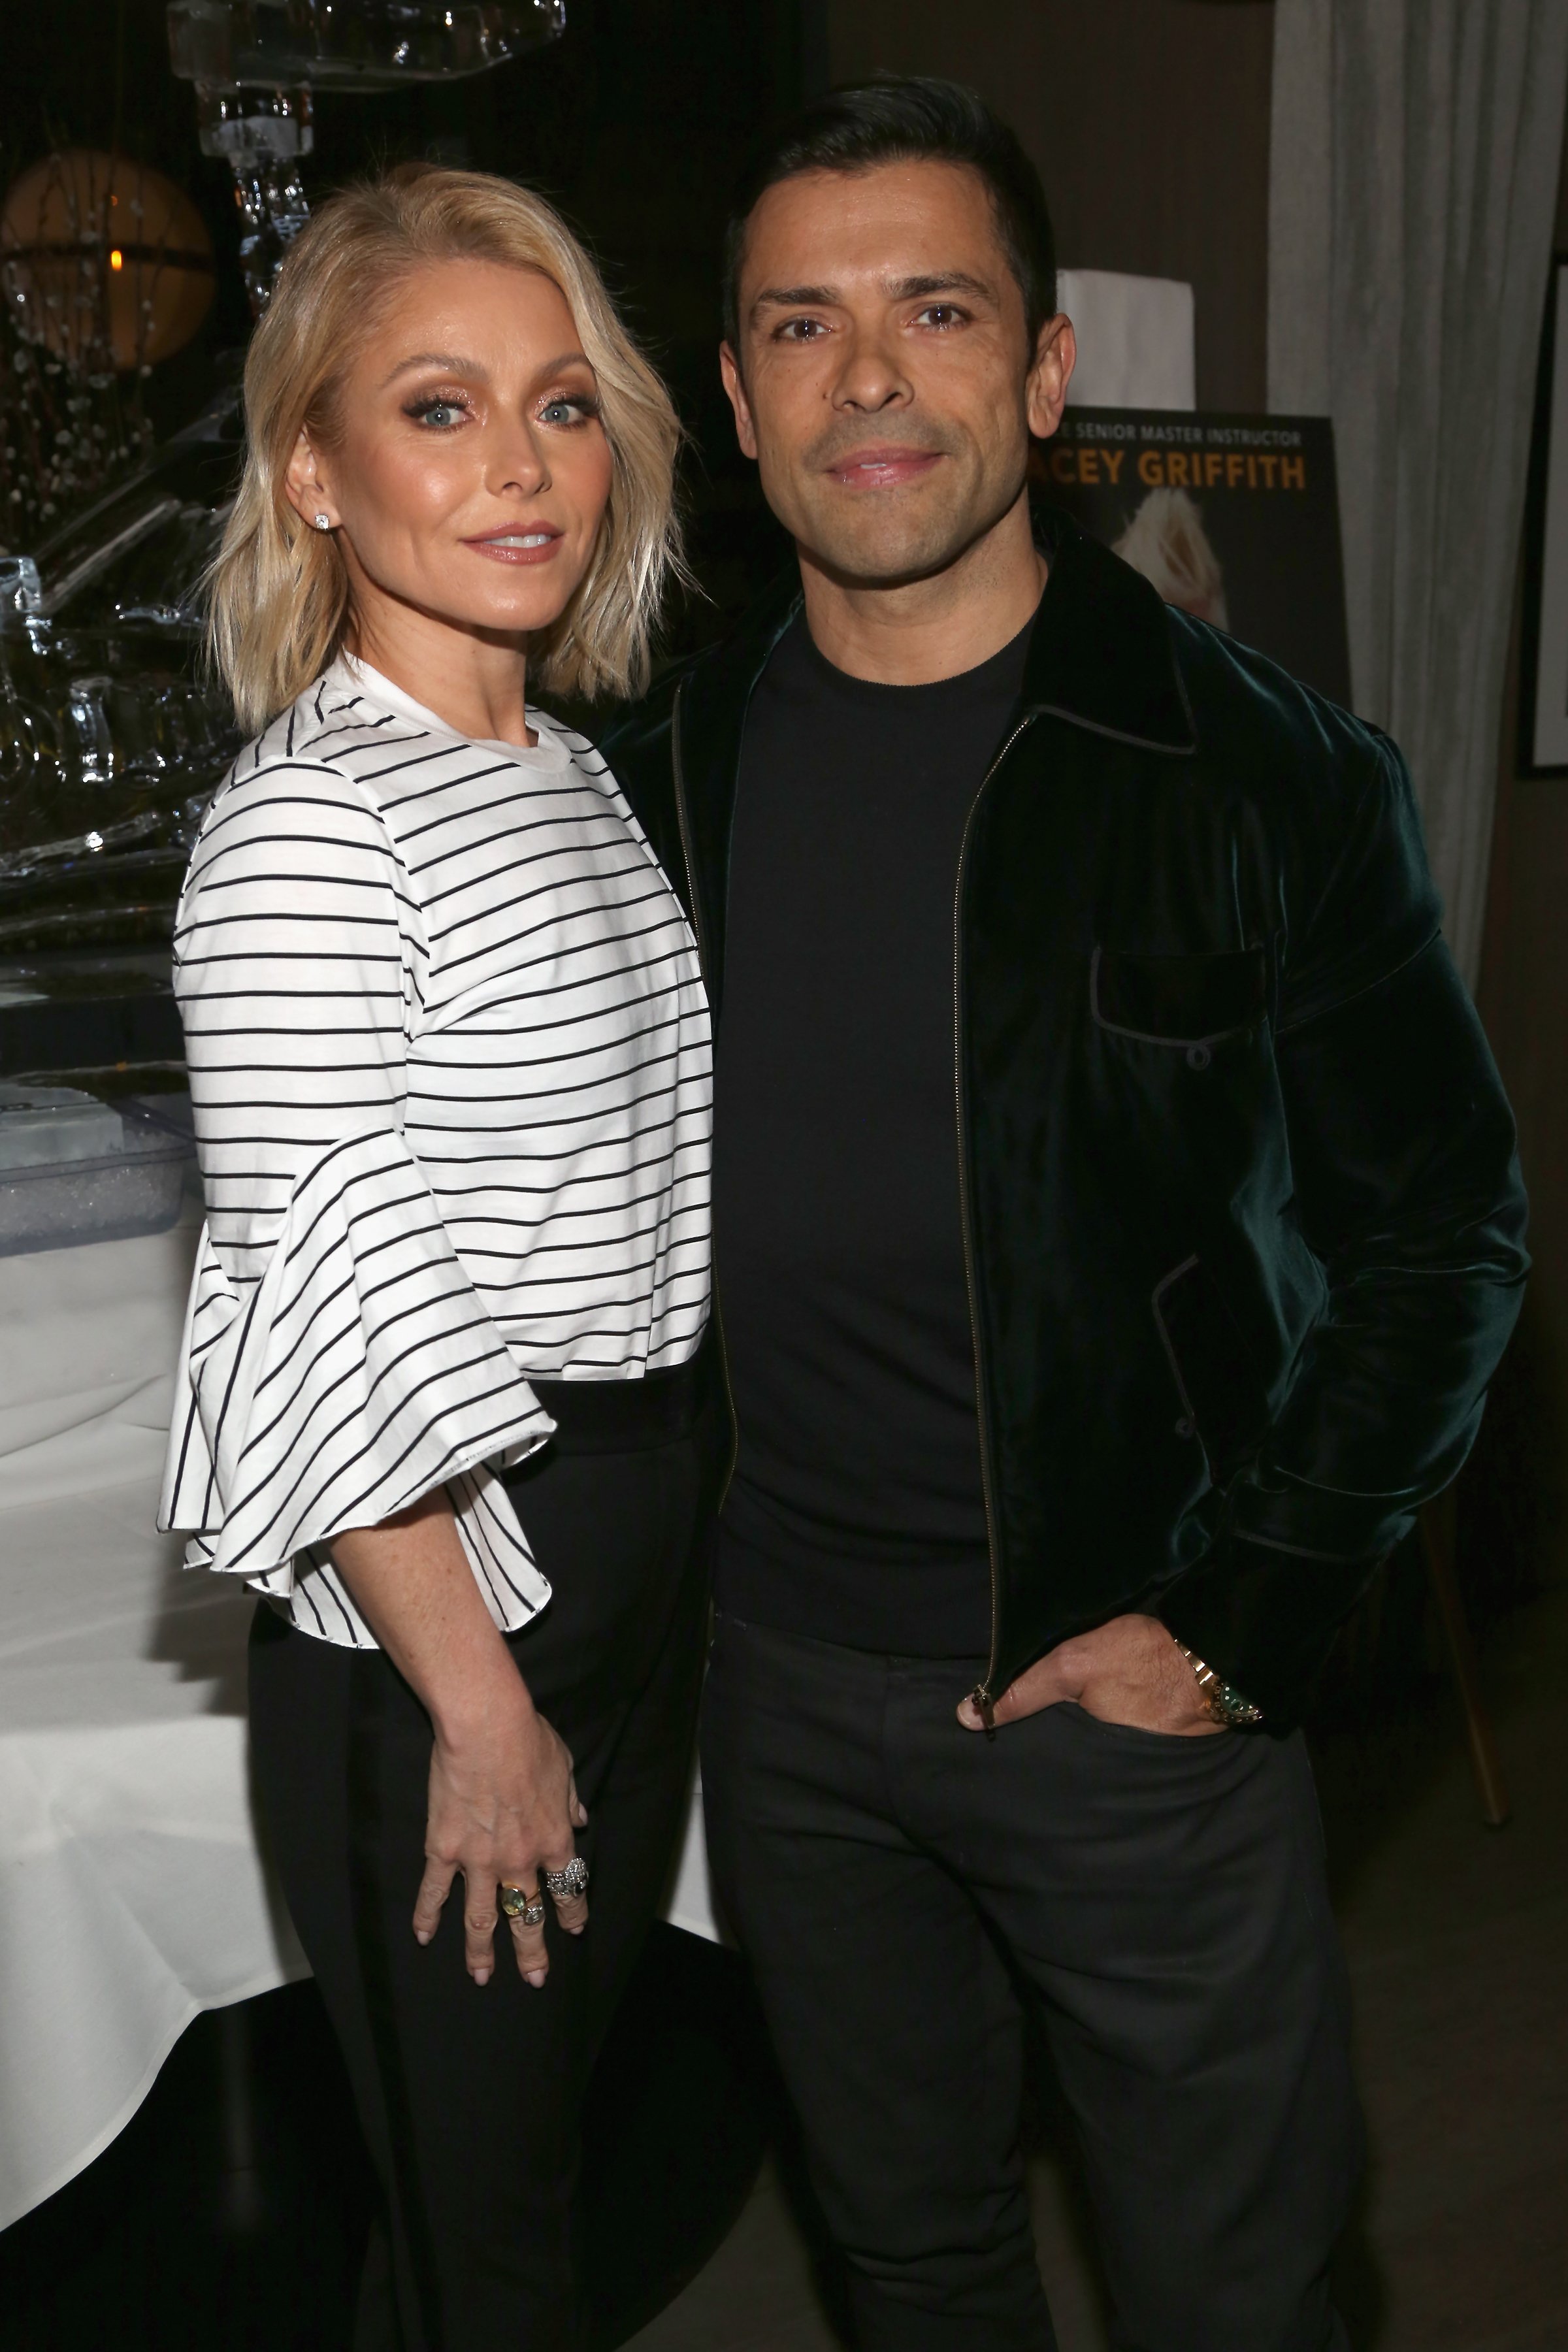 Kelly Ripa and Mark Consuelos at The Regency Bar and Grill on March 8, 2017 in New York City. | Source: Getty Images